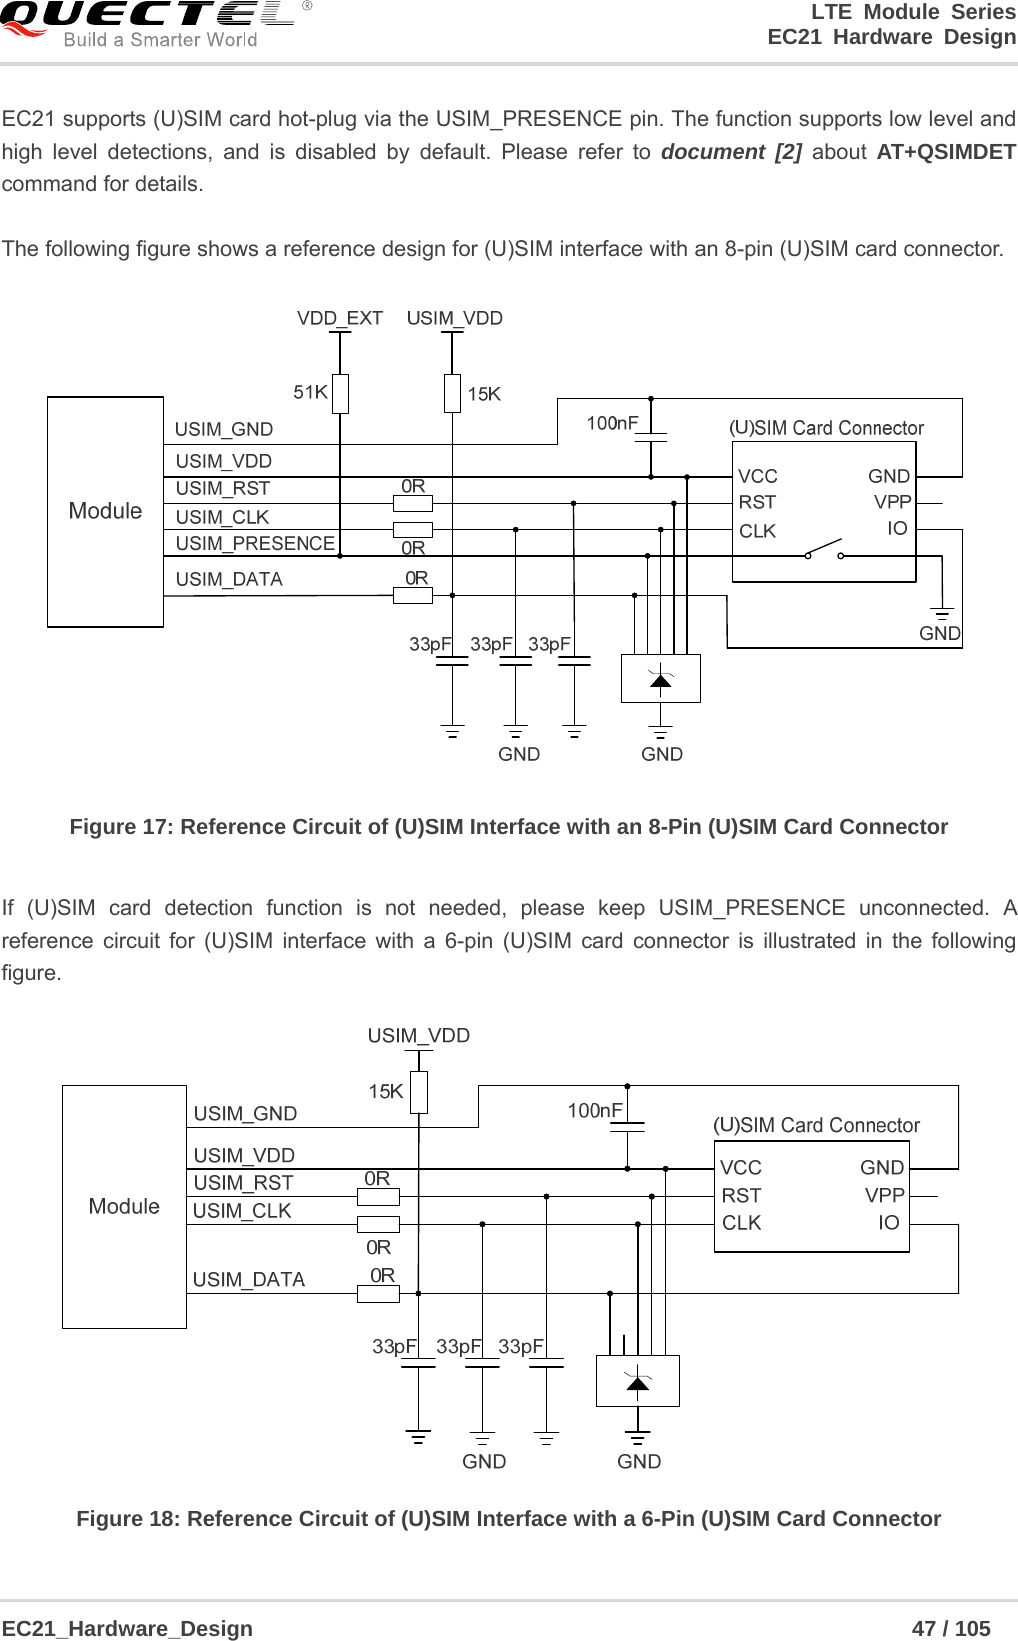                                                                        LTE Module Series                                                                 EC21 Hardware Design  EC21_Hardware_Design                                                            47 / 105    EC21 supports (U)SIM card hot-plug via the USIM_PRESENCE pin. The function supports low level and high level detections, and is disabled by default. Please refer to document [2] about AT+QSIMDET command for details.  The following figure shows a reference design for (U)SIM interface with an 8-pin (U)SIM card connector.  Figure 17: Reference Circuit of (U)SIM Interface with an 8-Pin (U)SIM Card Connector  If (U)SIM card detection function is not needed, please keep USIM_PRESENCE unconnected. A reference circuit for (U)SIM interface with a 6-pin (U)SIM card connector is illustrated in the following figure.  Figure 18: Reference Circuit of (U)SIM Interface with a 6-Pin (U)SIM Card Connector 